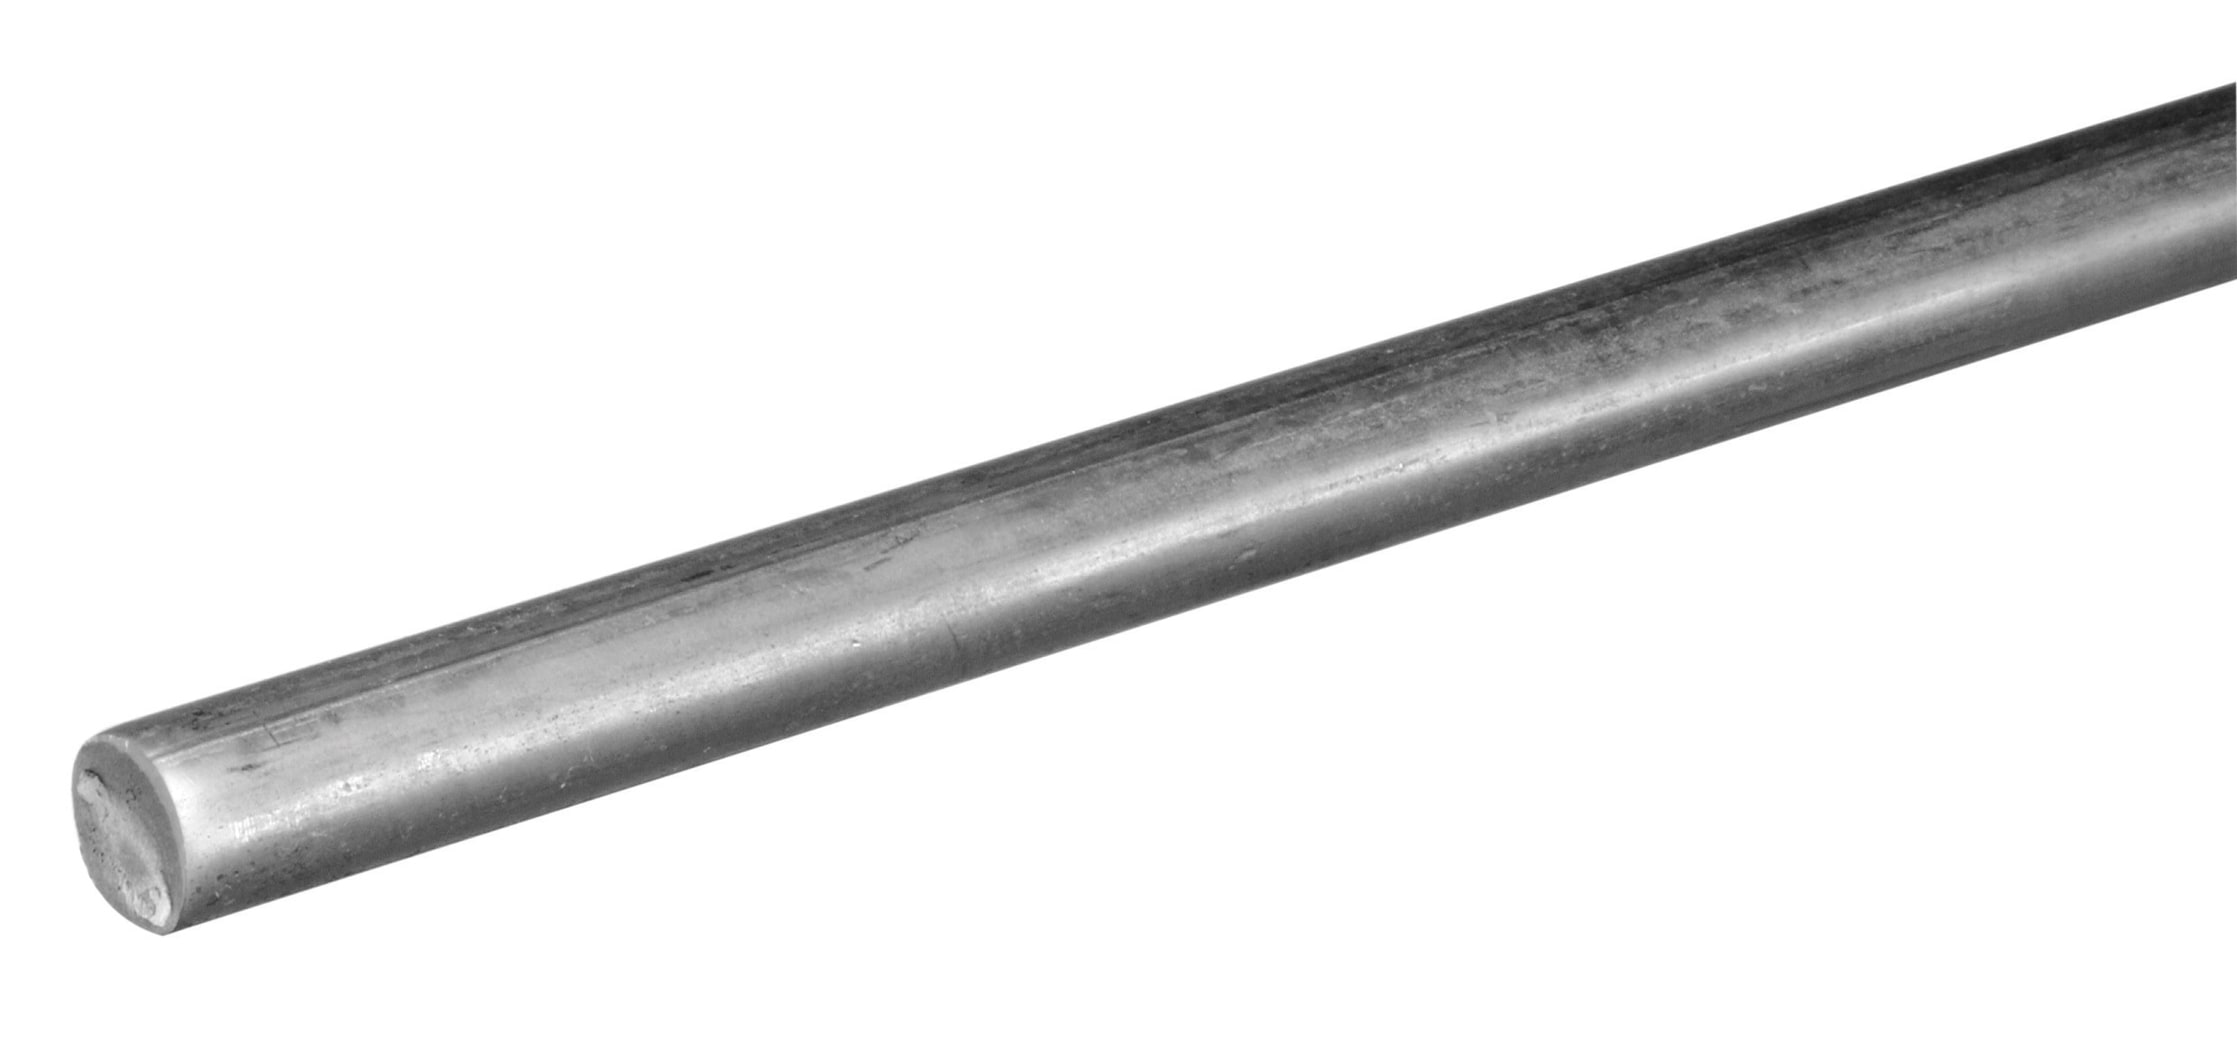 Hillman 5/8-in x 3-ft Zinc-plated Steel Solid Round Rod in the